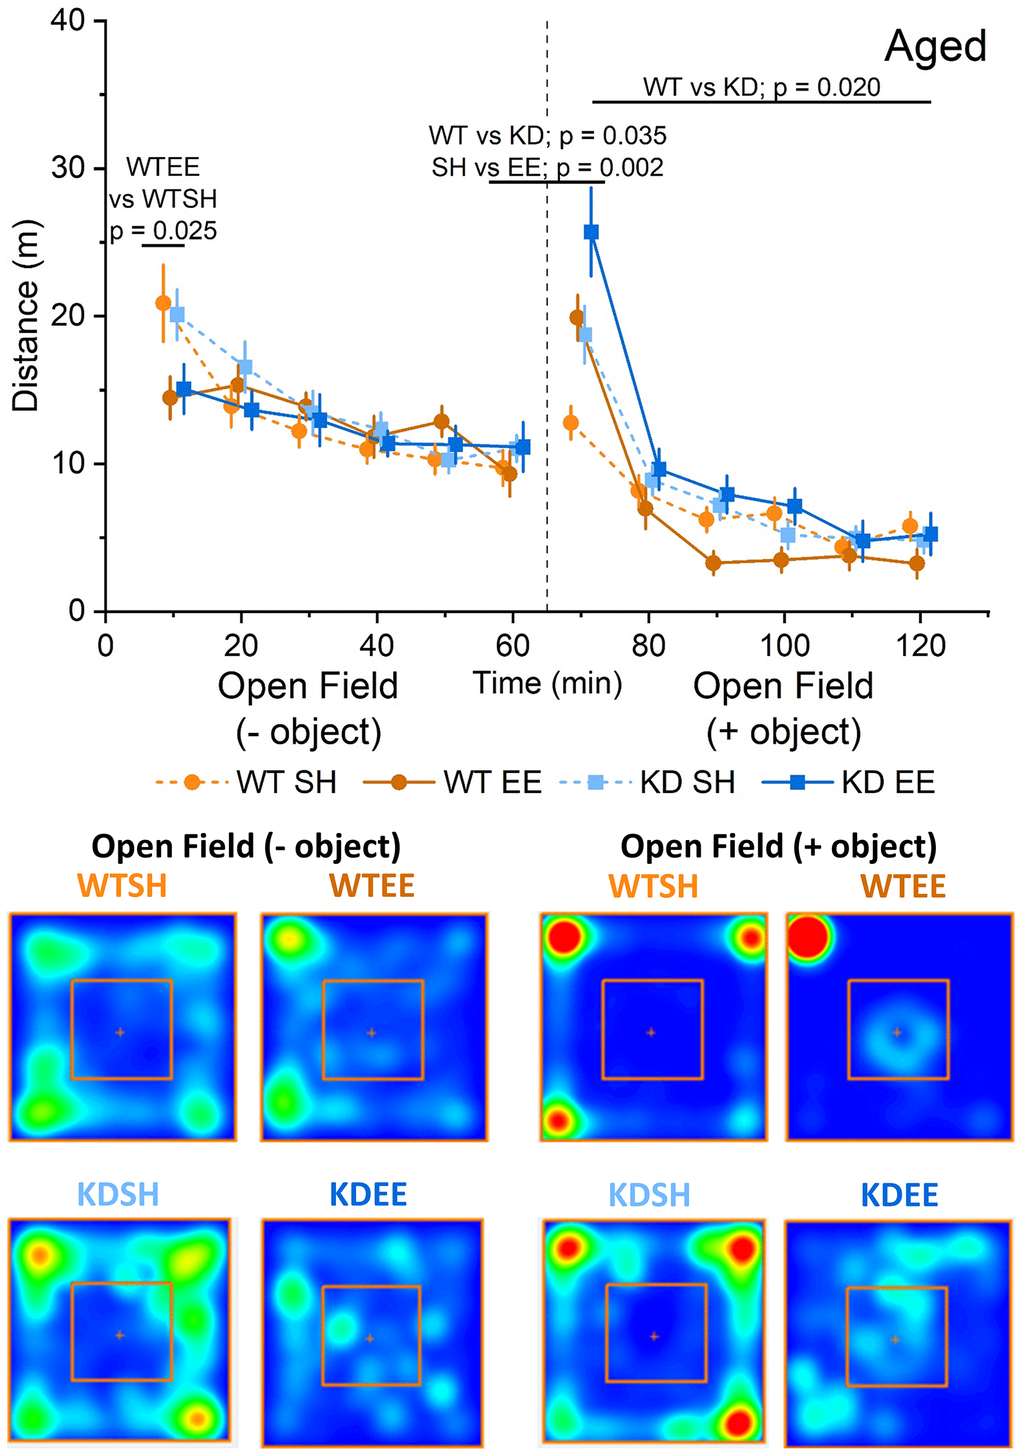 Enrichment reduces novelty-induced locomotion in aged mice. In the Aged groups an RM-ANOVA showed an effect of Time for all groups on the distance travelled (F(5,260) = 27.53, p p p = 0.025), but not between KDSH and KDEE (p = 0.077). Following the introduction of an object (broken vertical line) an analysis of the novelty-induced locomotor shift was carried out comparing levels of activity during the first 10 minutes from the introduction of the object with the last 10 minutes of the open field. A significant effect for both Genotype and Housing was found (F(1,52) = 4.71, p = 0.035 and F(1,52) = 10.34, p = 0.002, respectively) indicating a greater effect of novelty in the enriched animals and in the MSK1 KD mutants. In the open field + object phase of the trial, an RM-ANOVA showed an effect of Time for all groups (F(5,260) = 132.43, p p p = 0.001, respectively) and also a Genotype effect; F(1,52) = 5.78, p = 0.020 indicating a greater activity in the MSK1 KD mutant mice, and with lower levels of activity in the enriched WT mice. The data are presented as distance travelled in metres as cumulative distance reported in 10 min intervals. Each phase lasted 60 min (120 min in total). Datapoints are presented as mean ± SEM. Heatmaps below the graphs depict the arena occupancy in the open field ± object stages for the mice of each group.